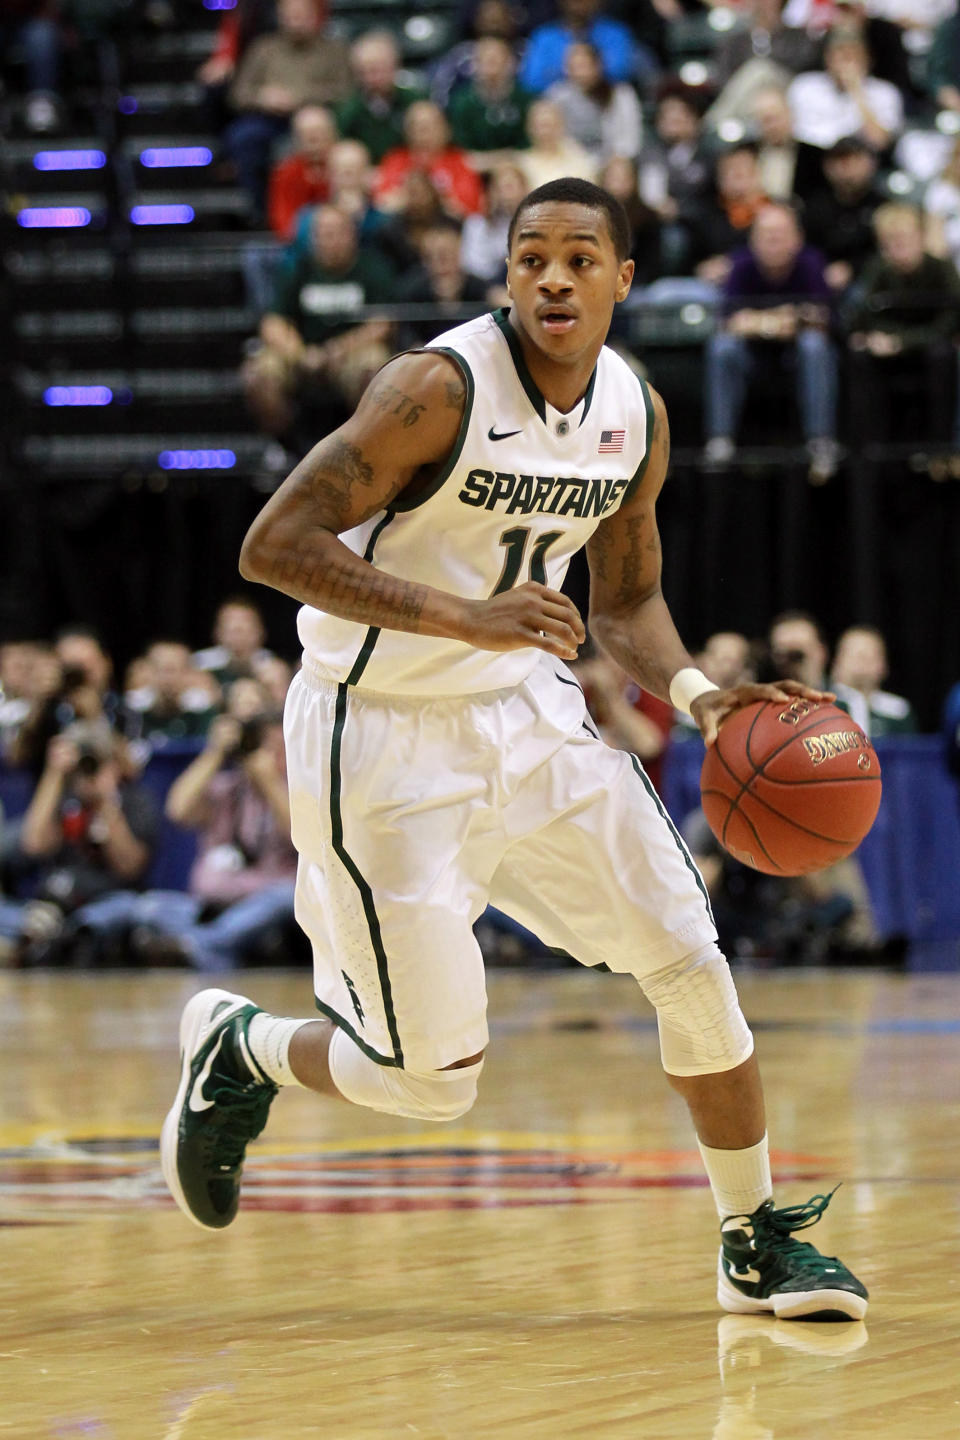 INDIANAPOLIS, IN - MARCH 11: Keith Appling #11 of the Michigan State Spartans drives against the Ohio State Buckeyes during the Final Game of the 2012 Big Ten Men's Conference Basketball Tournament at Bankers Life Fieldhouse on March 11, 2012 in Indianapolis, Indiana. (Photo by Andy Lyons/Getty Images)